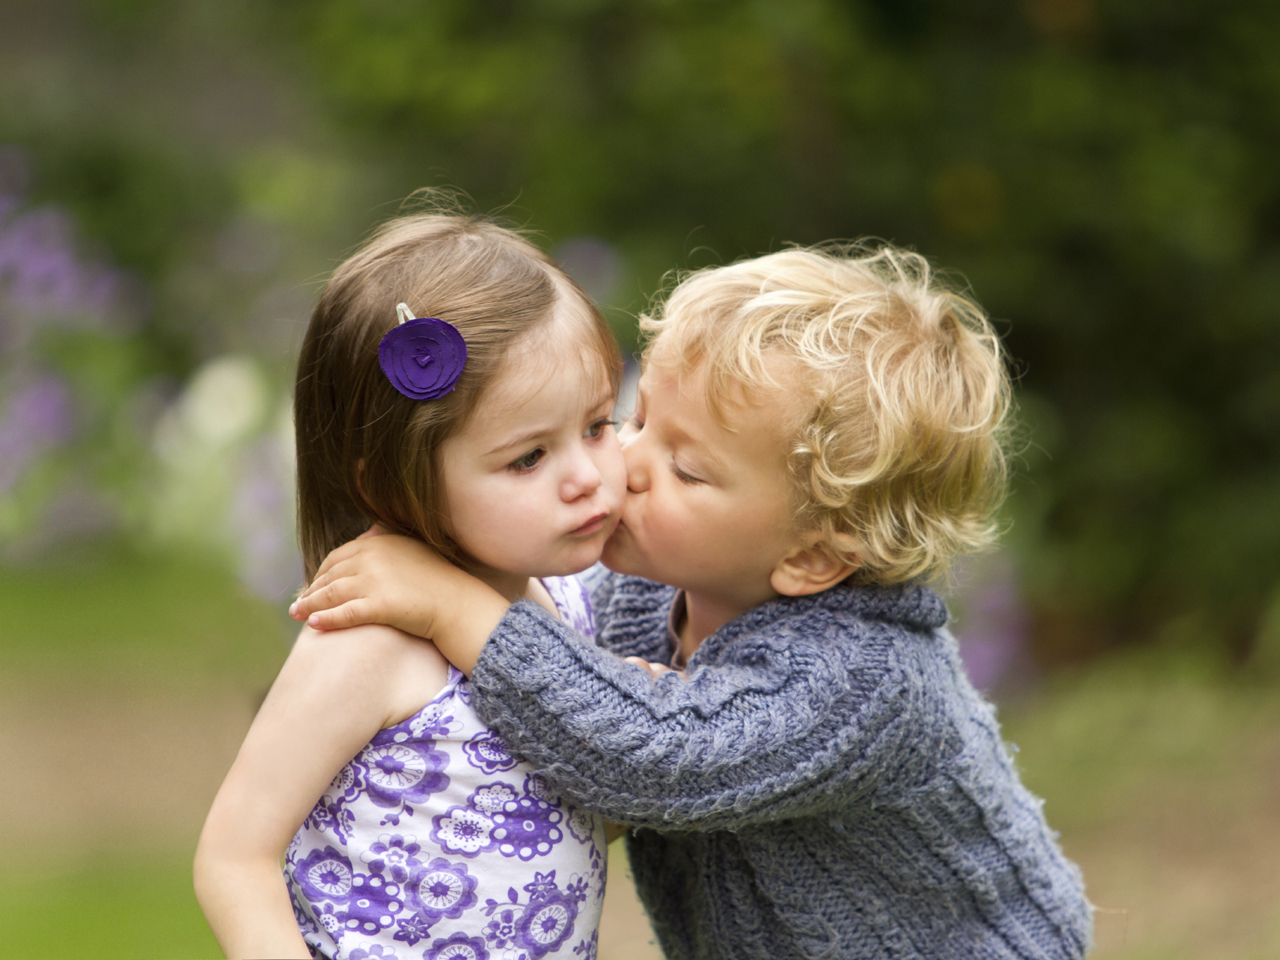 A Boy And A Girl Kissing